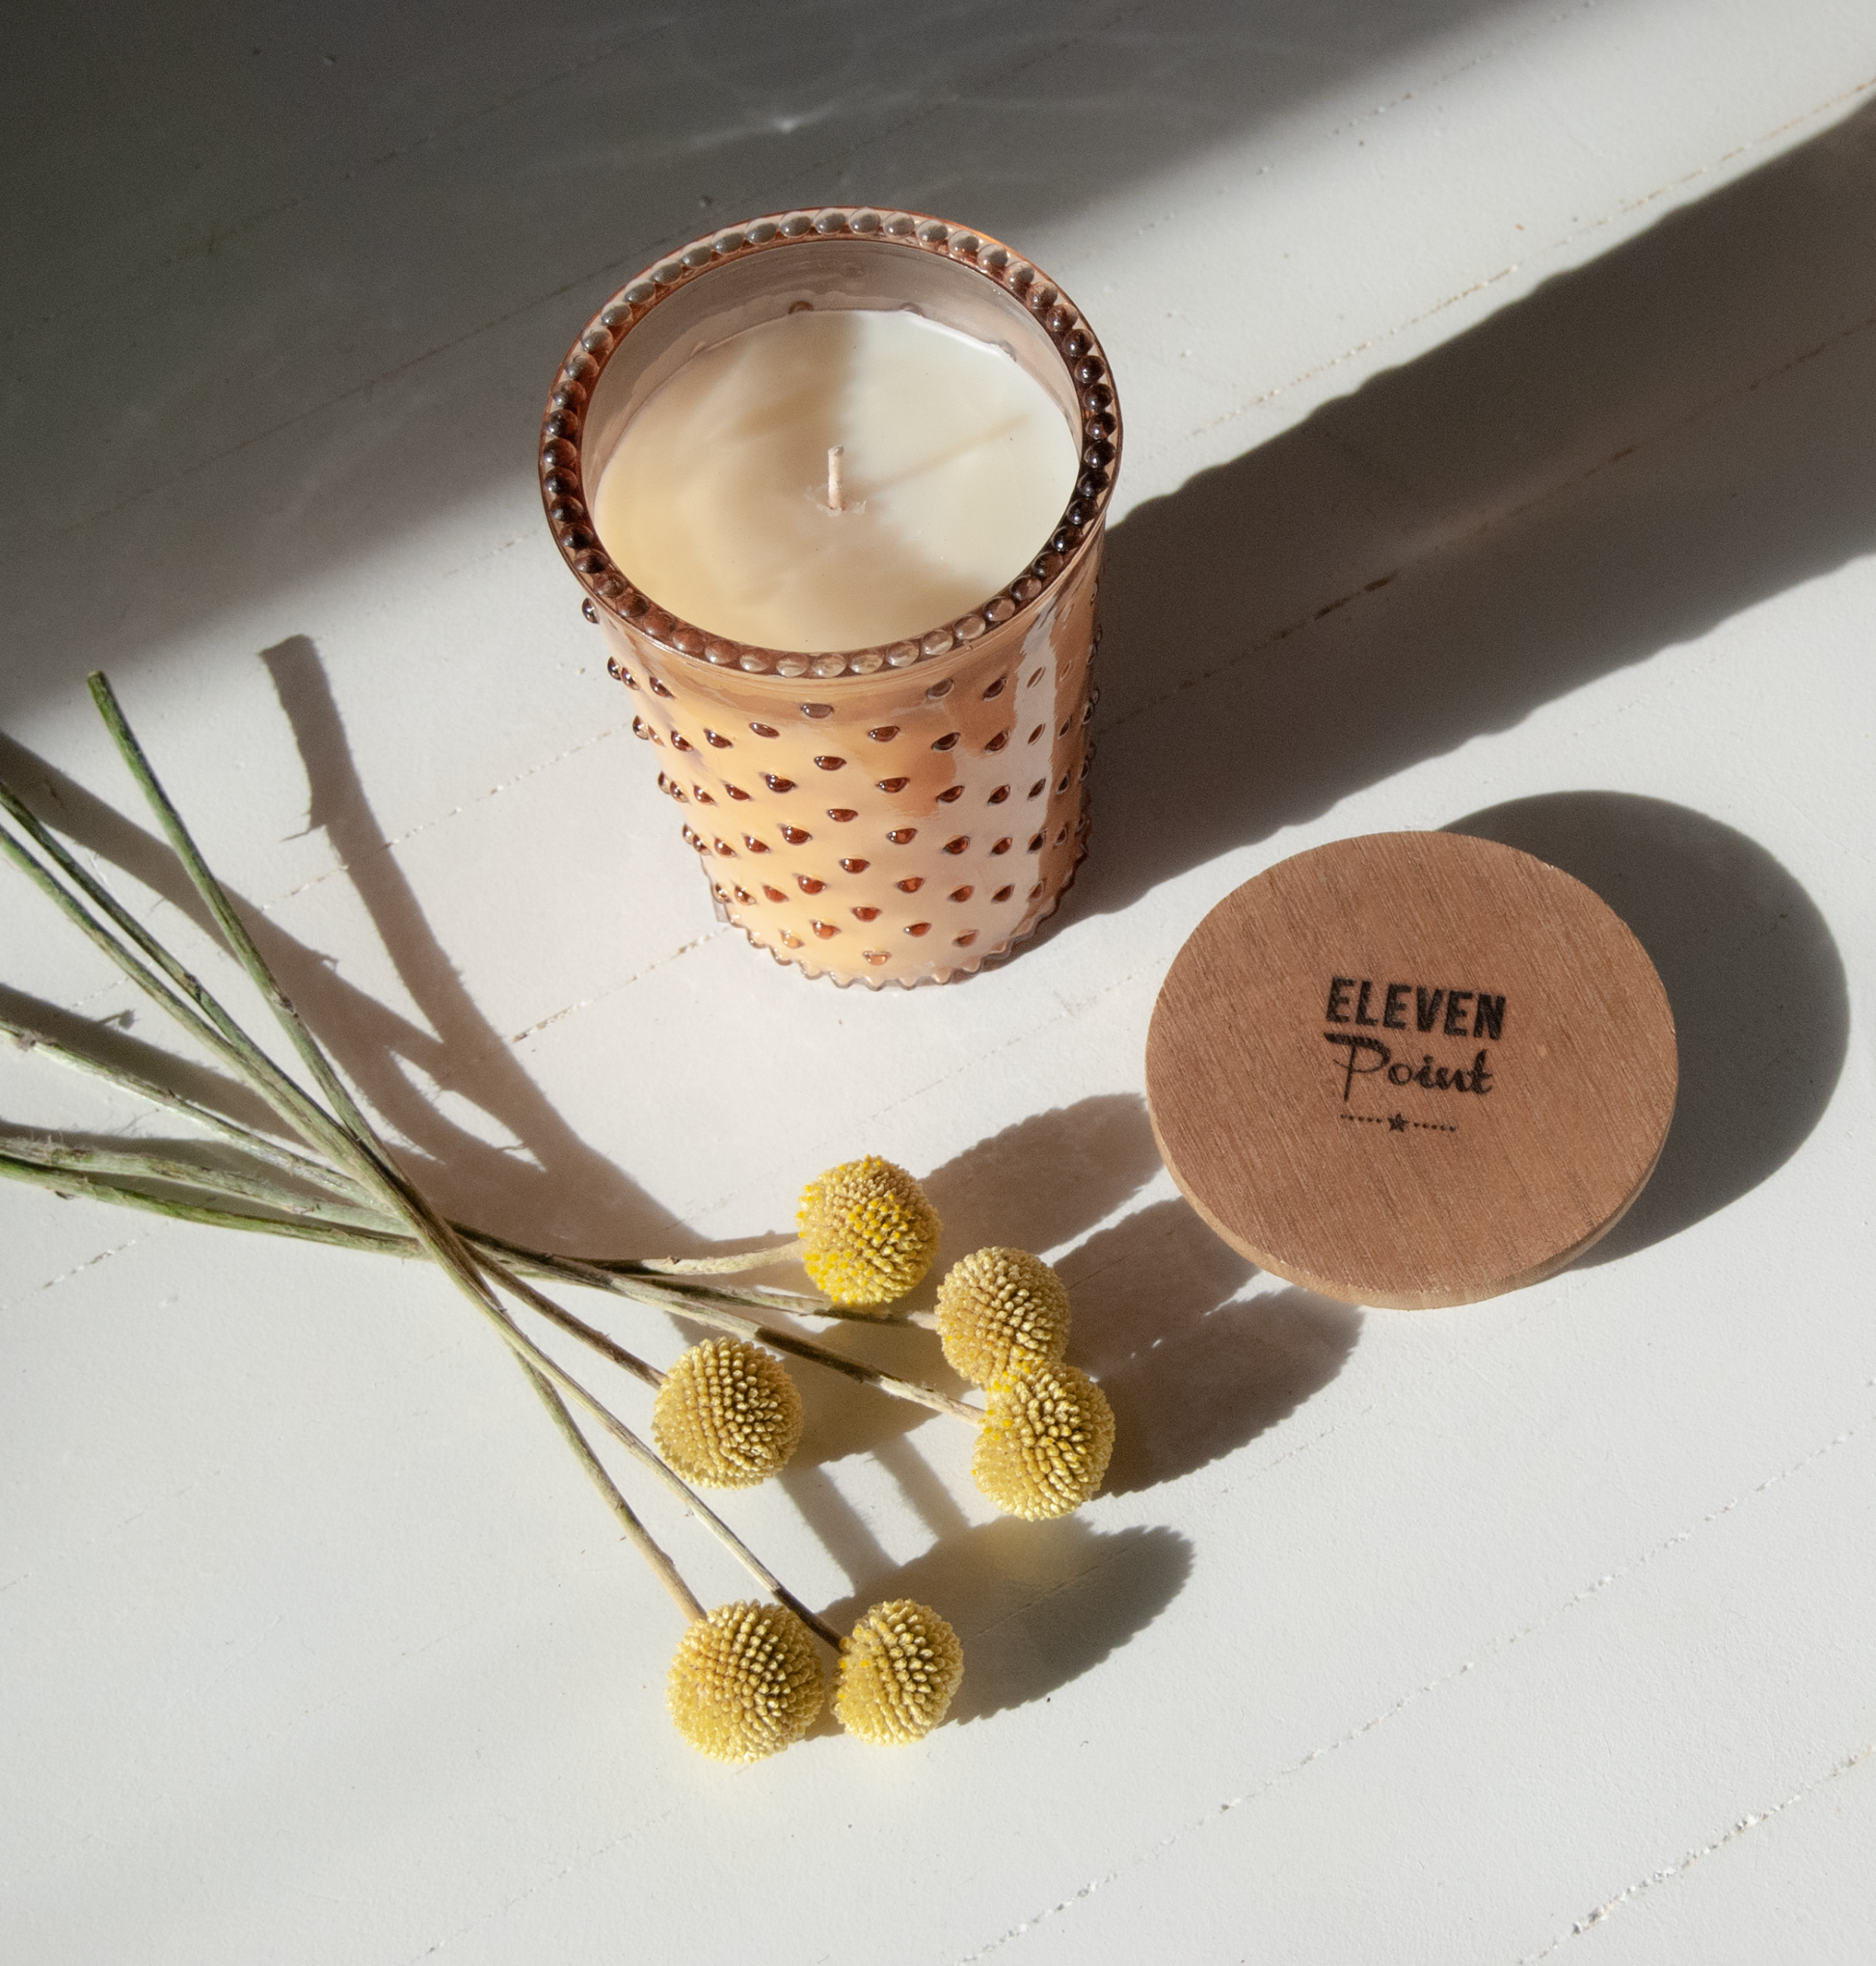 Canyon Hobnail Candle in Caramel Candle Eleven Point   